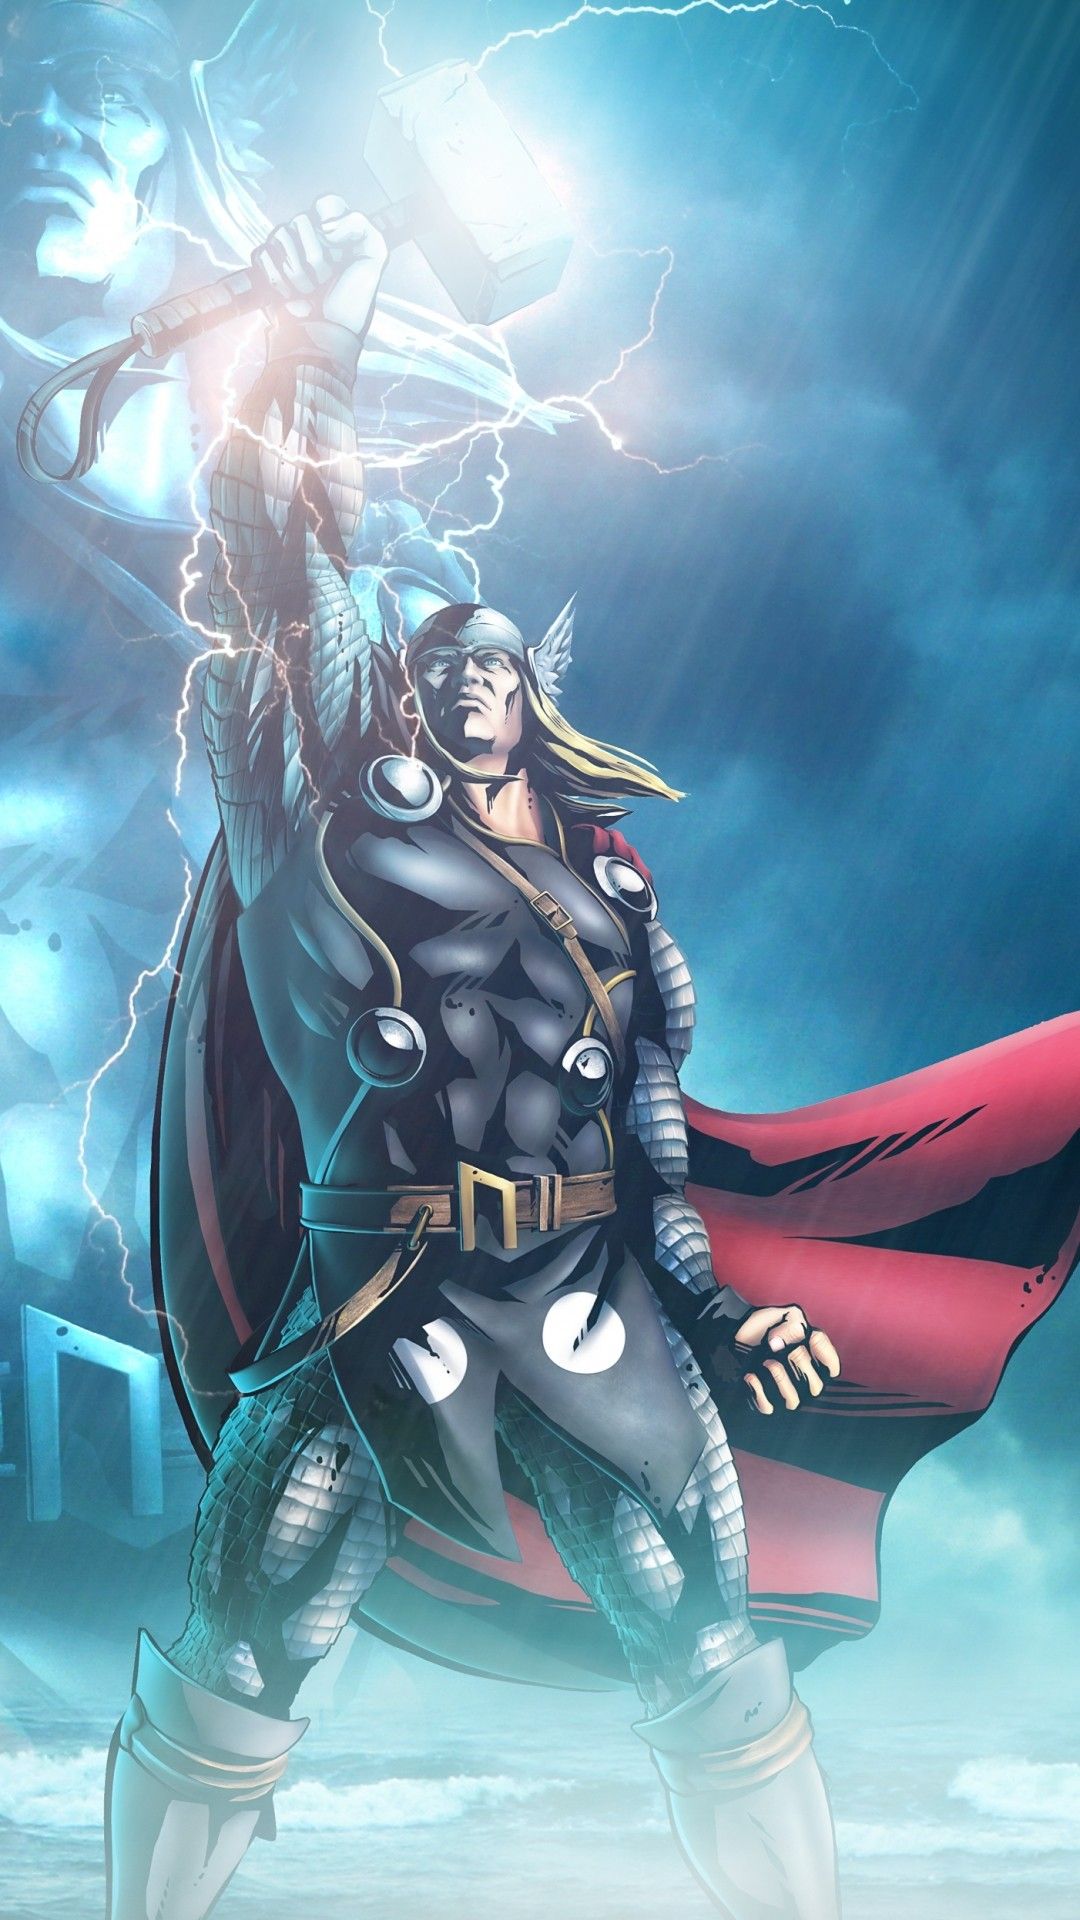 The Mighty Thor Wallpapers